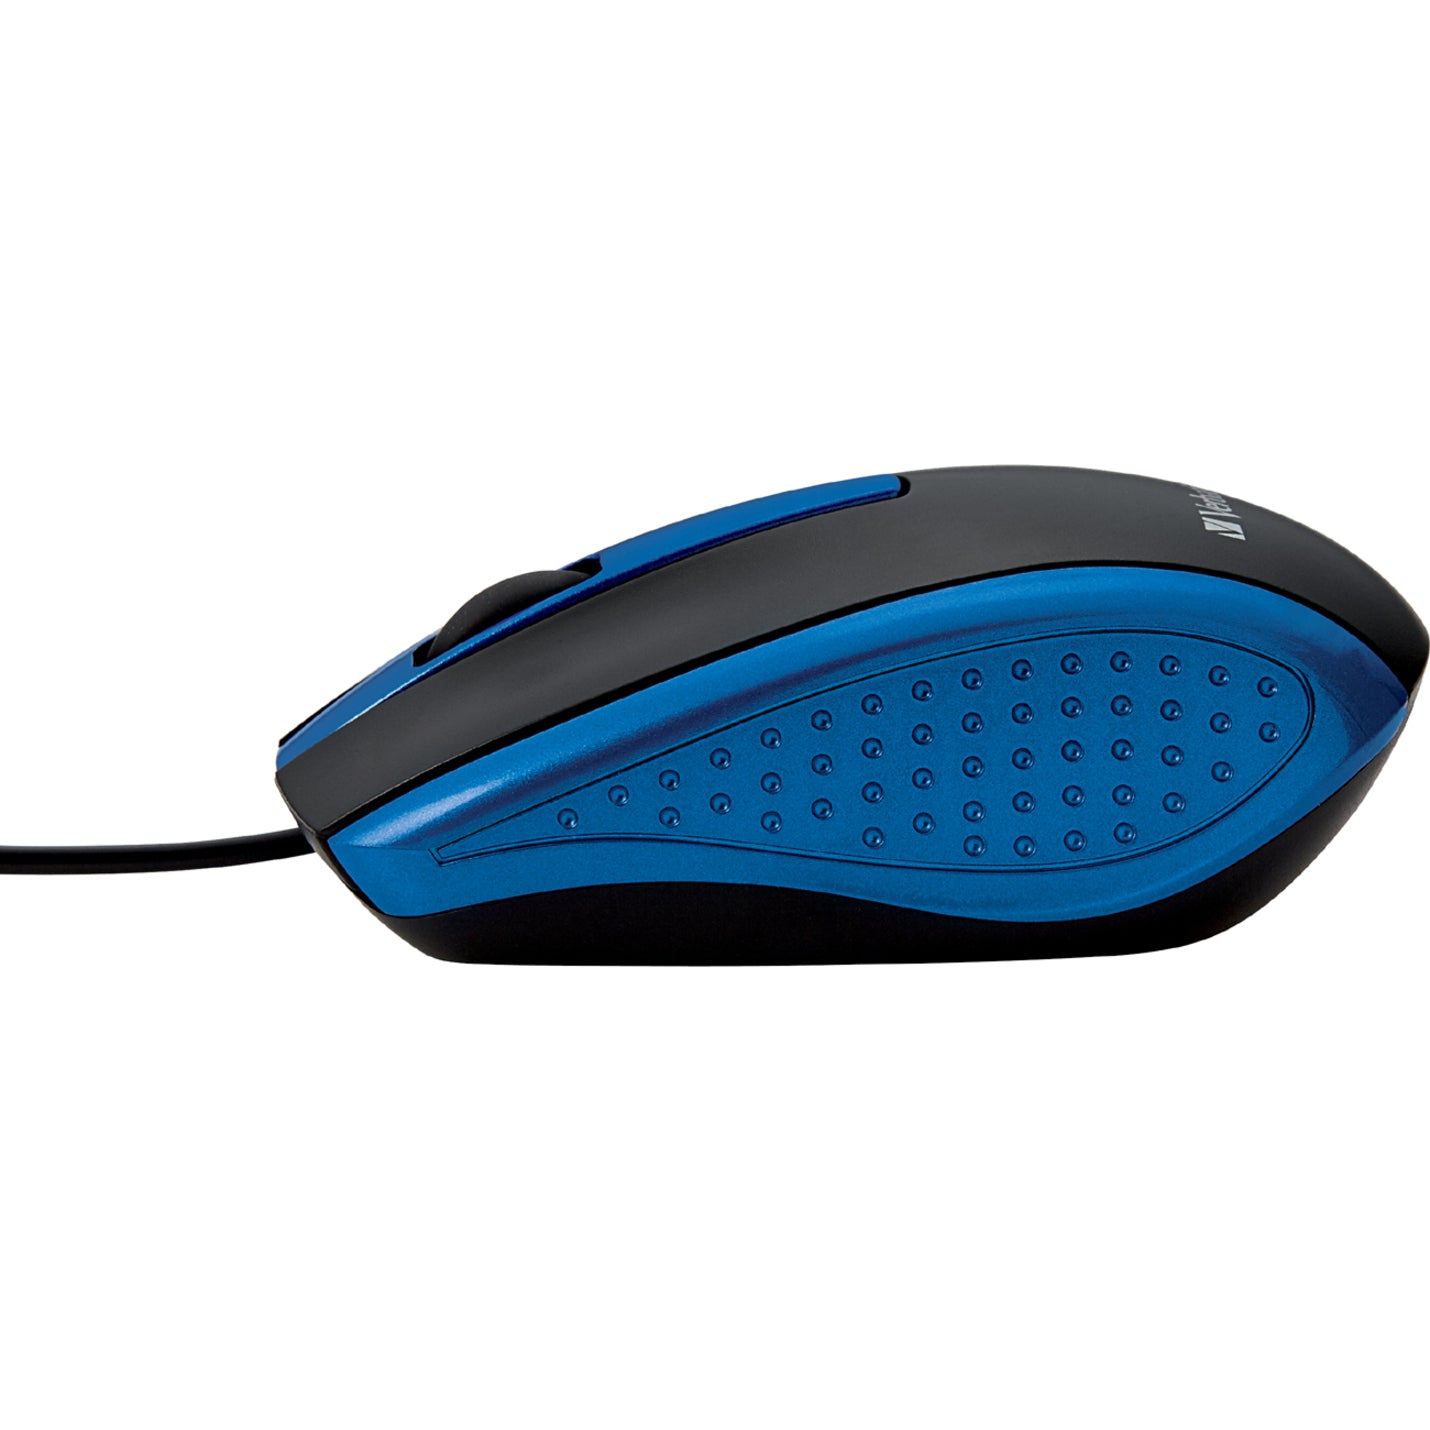 Verbatim 99743 Corded Notebook Optical Mouse - Blue, USB Type A, Scroll Wheel